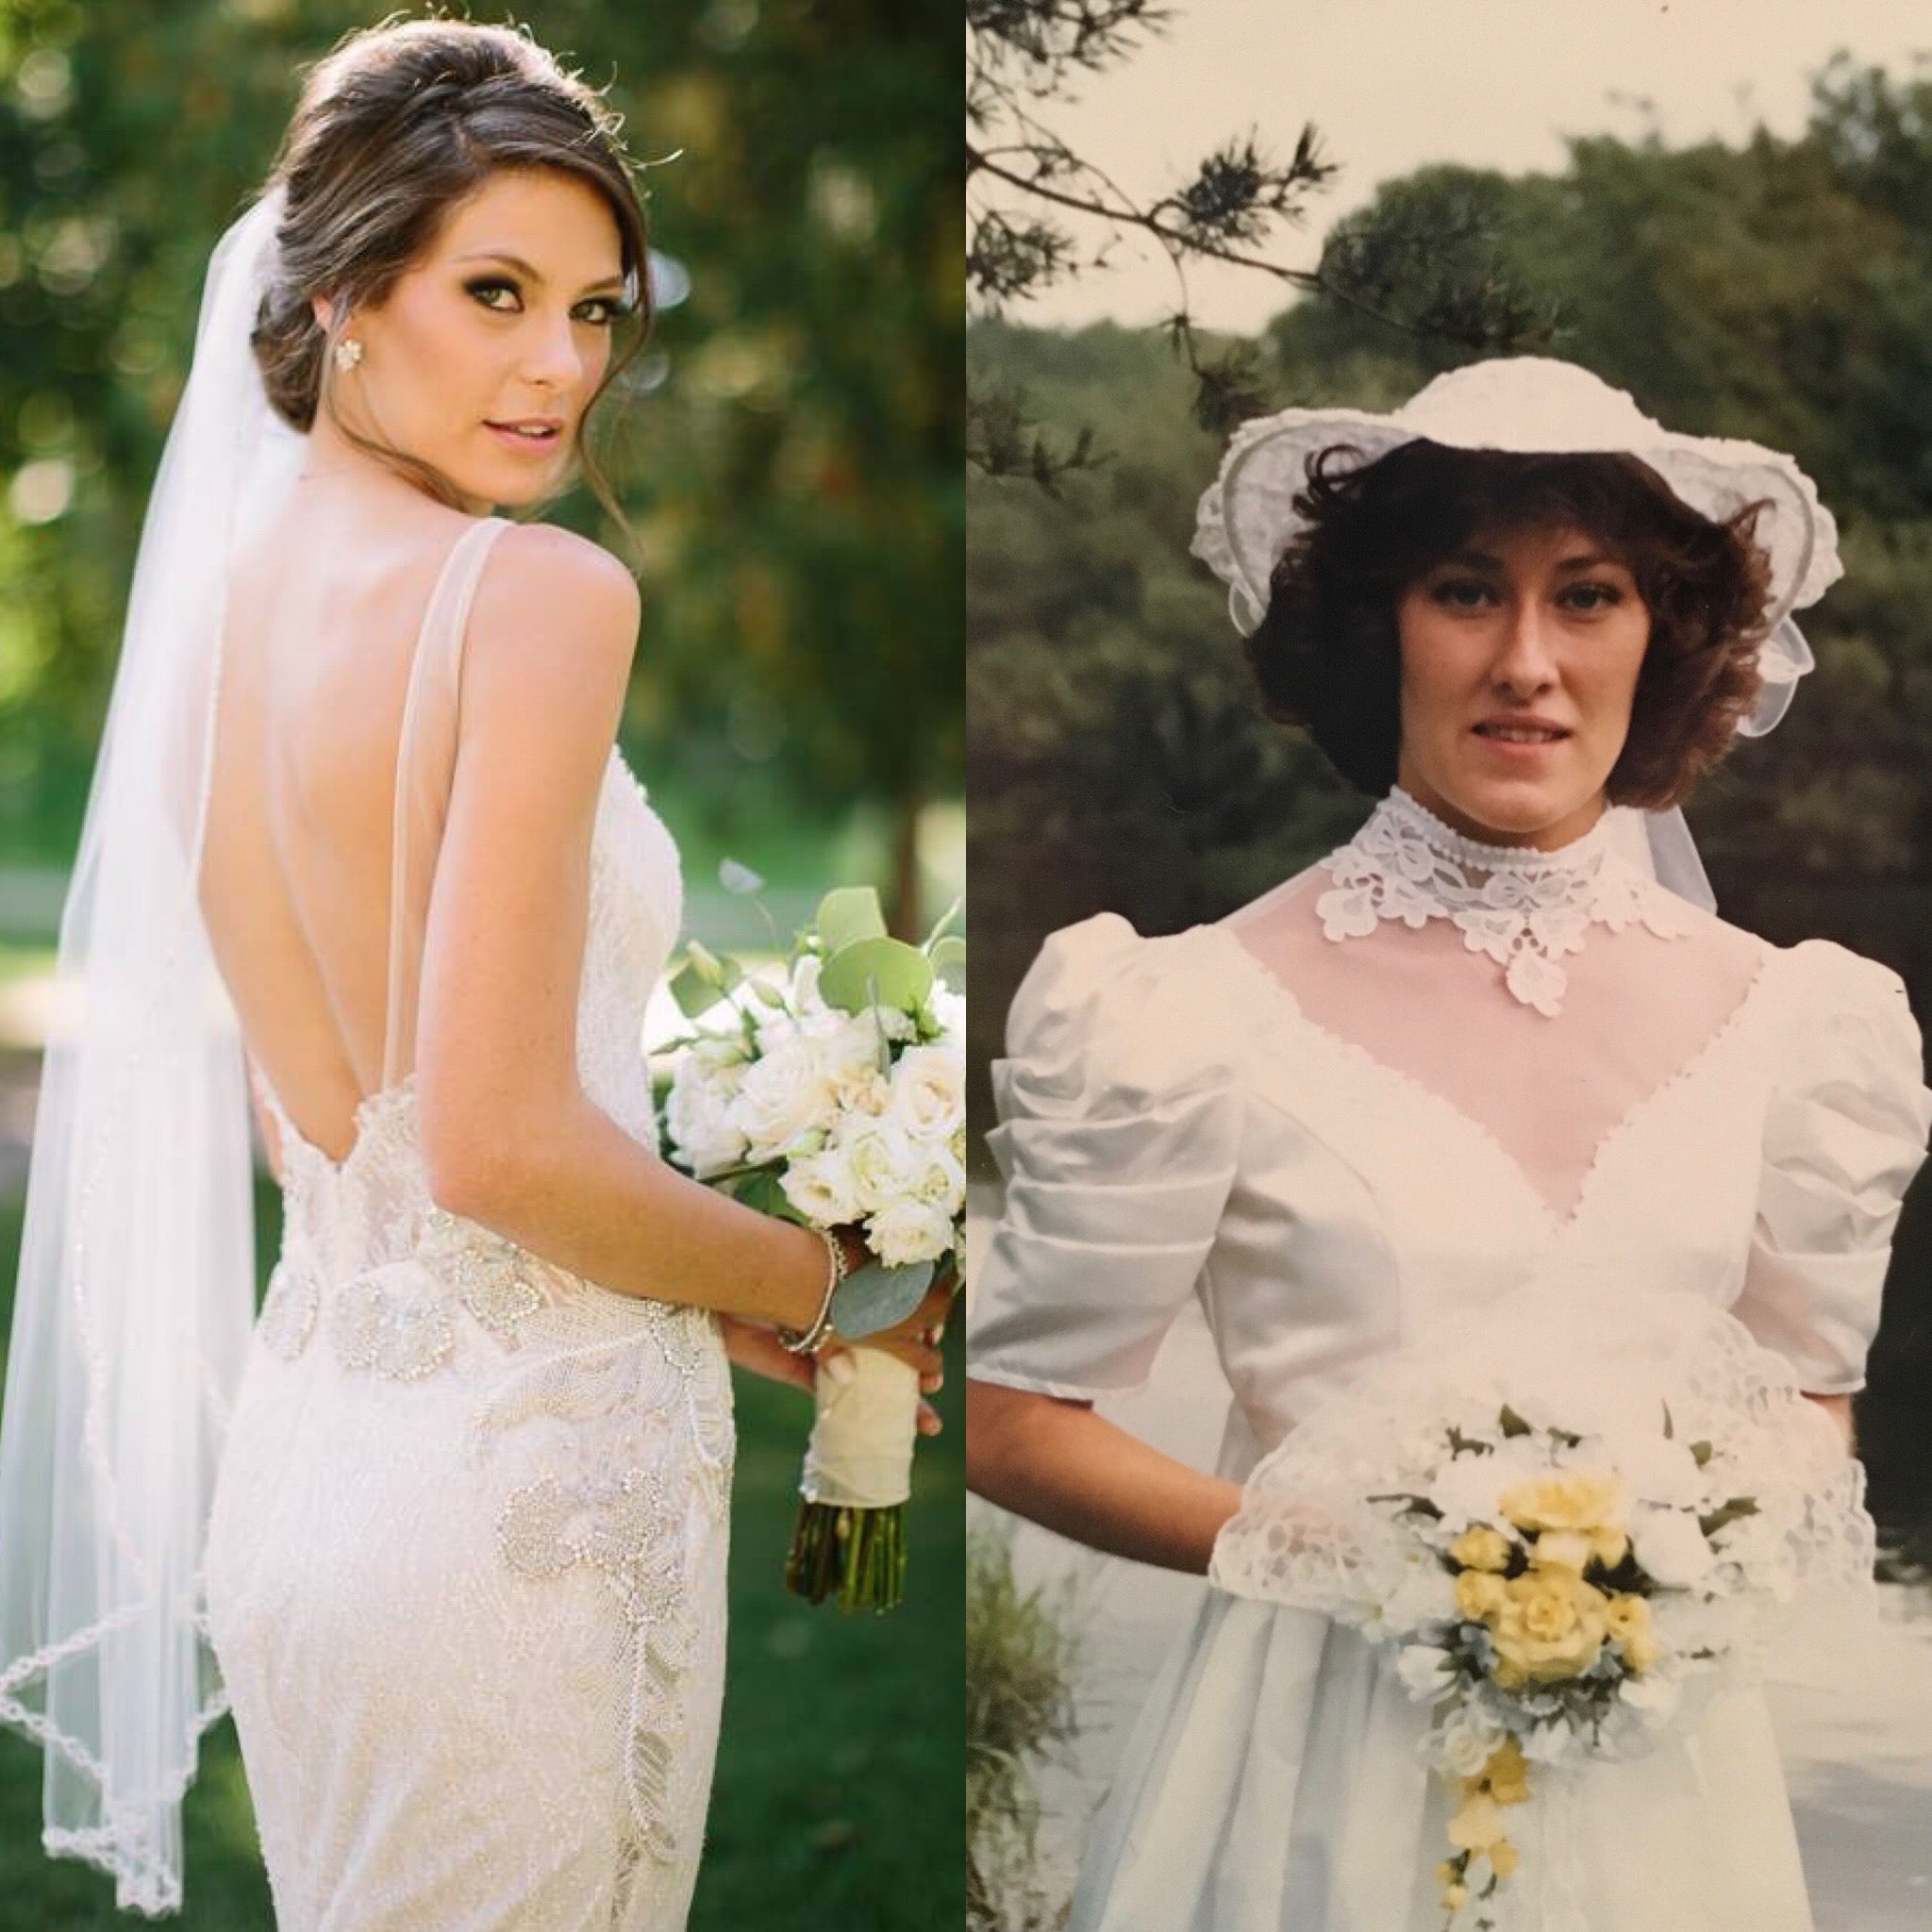 Take a look at these Kleinfeld brides and their moms in their wedding dresses on their wedding day in honor of Mother's Day!